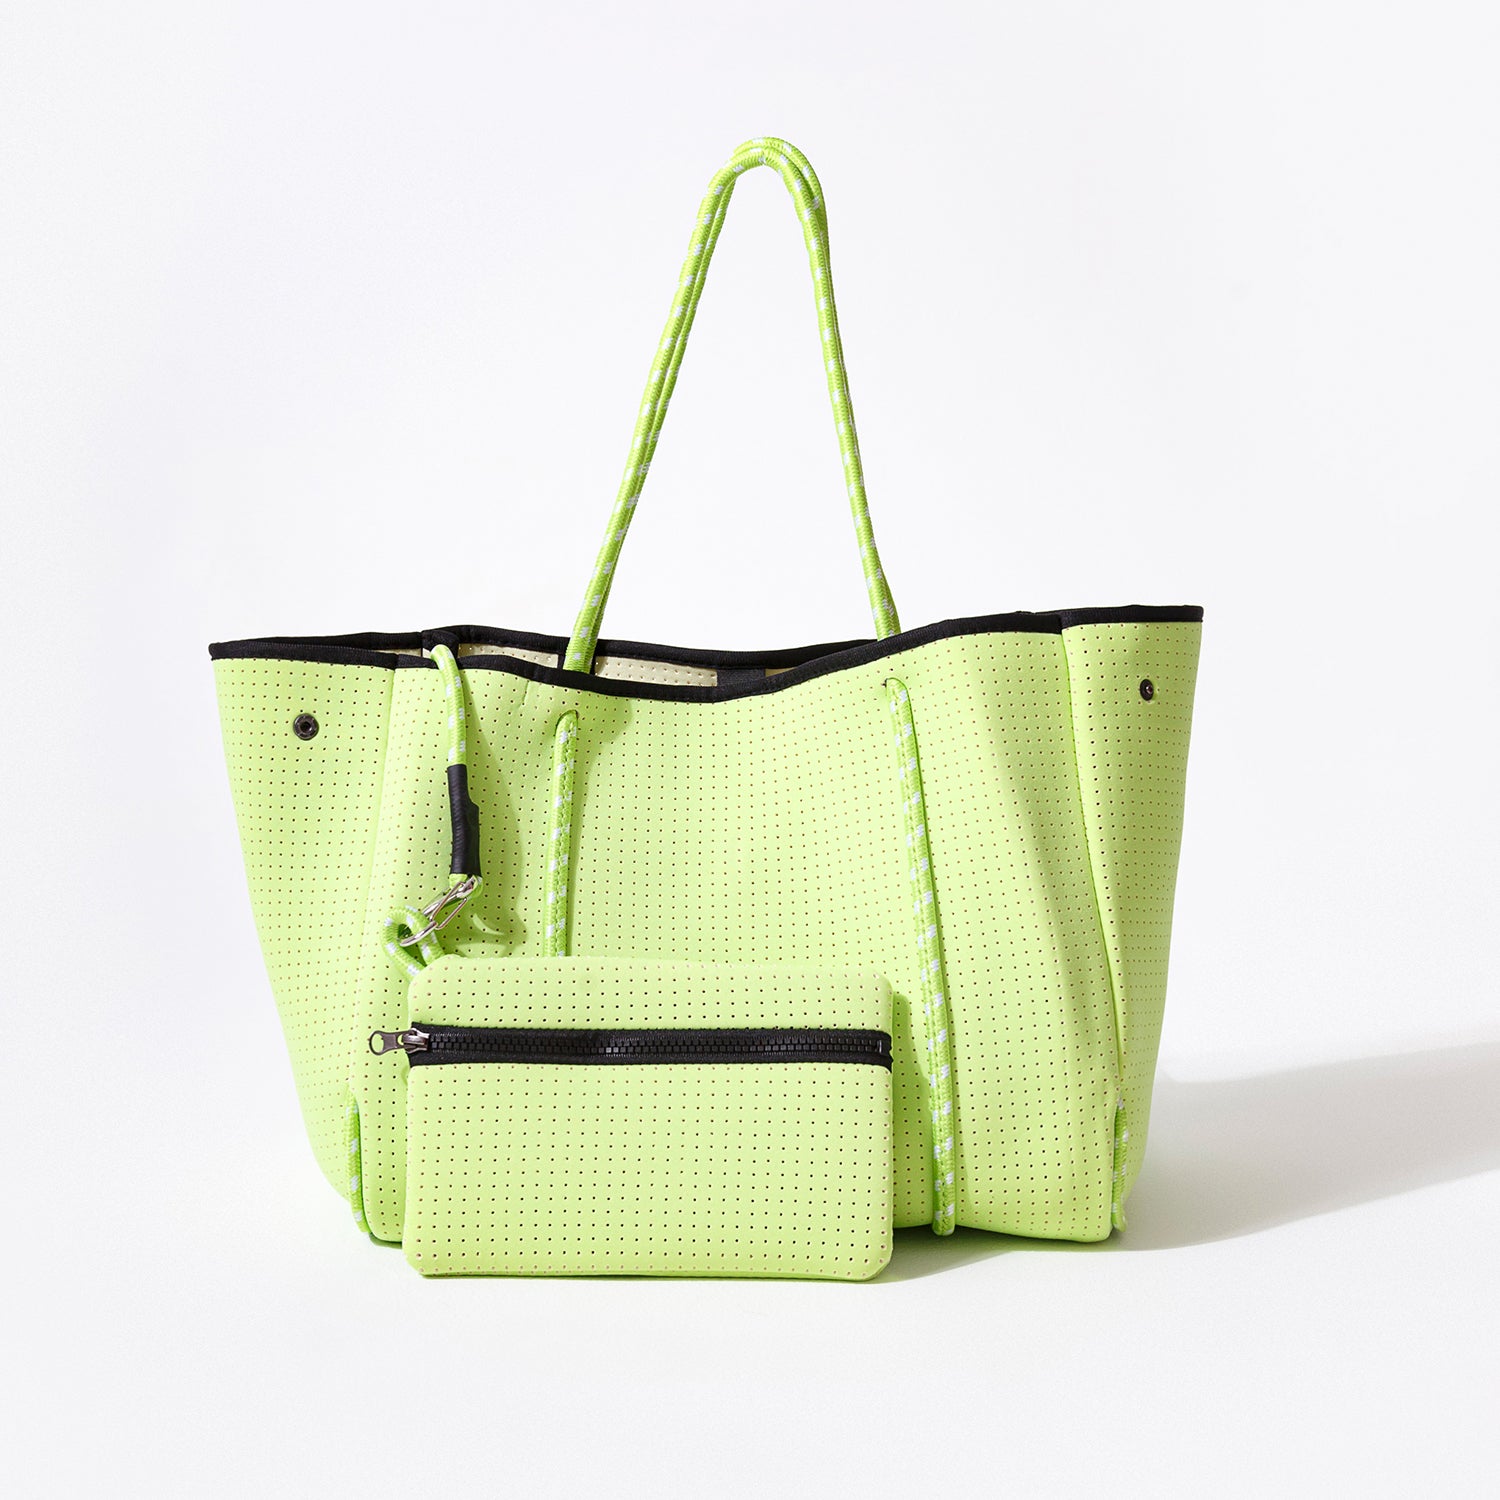 COMMERCIAL TOTE BAG in green